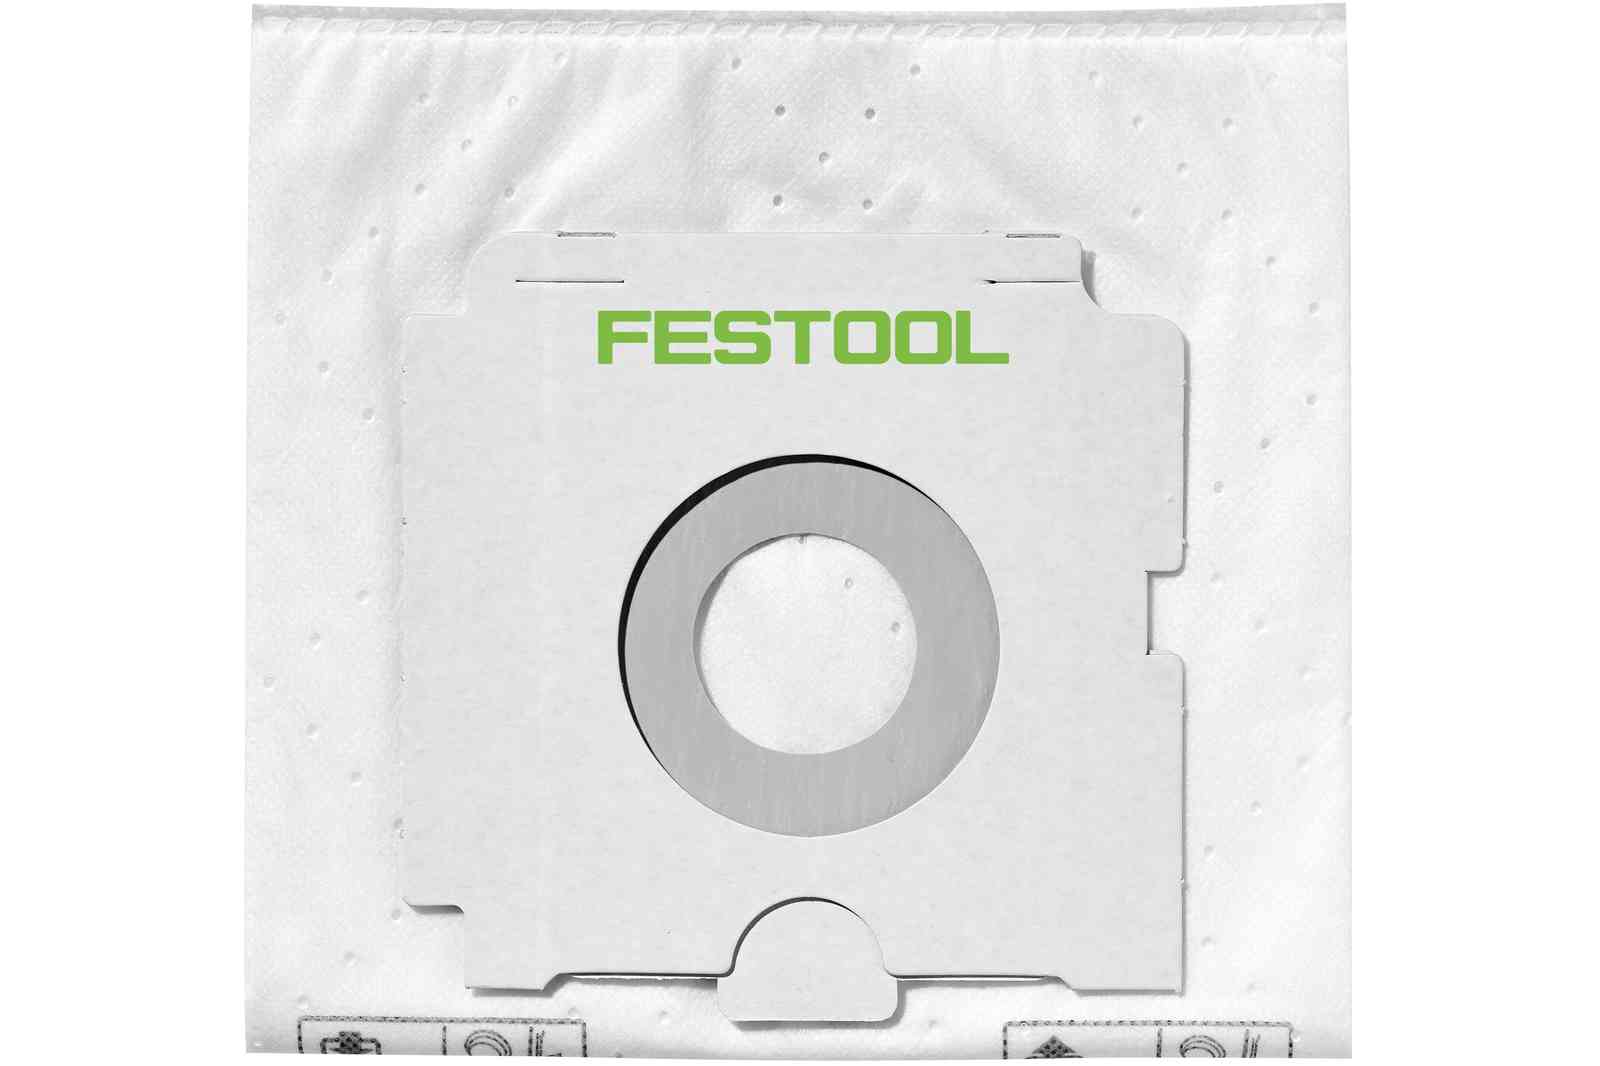 Festool 500438 SELFCLEAN Filter Bag for CT SYS, 5 Pack